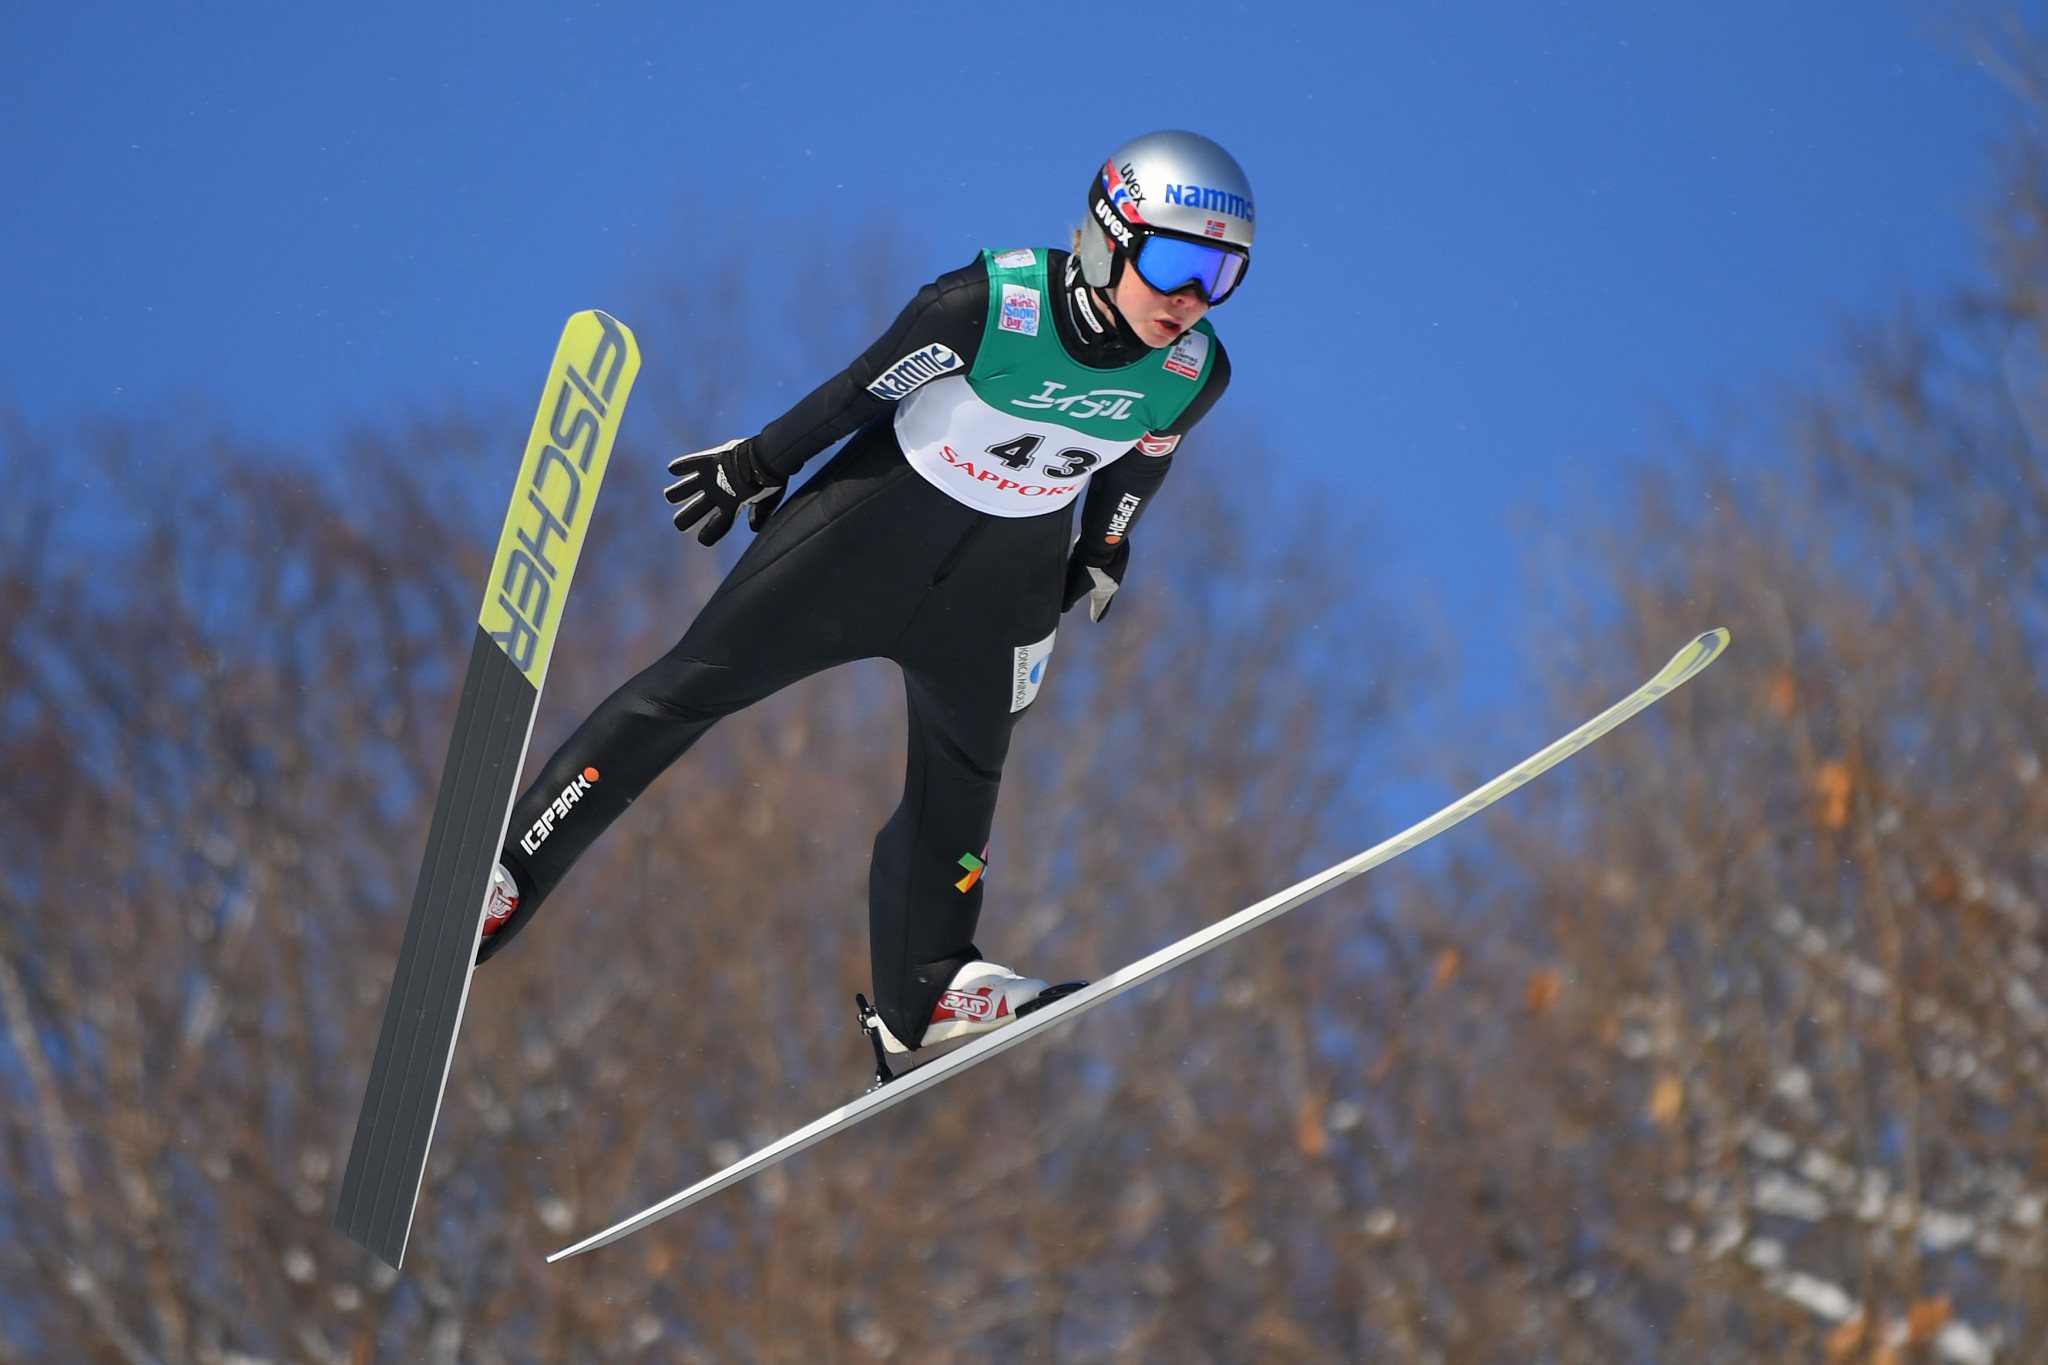 Olympic champion Maren Lundby of Norway won the women's FIS Ski Jumping World Cup event in Sapporo ©Getty Images 